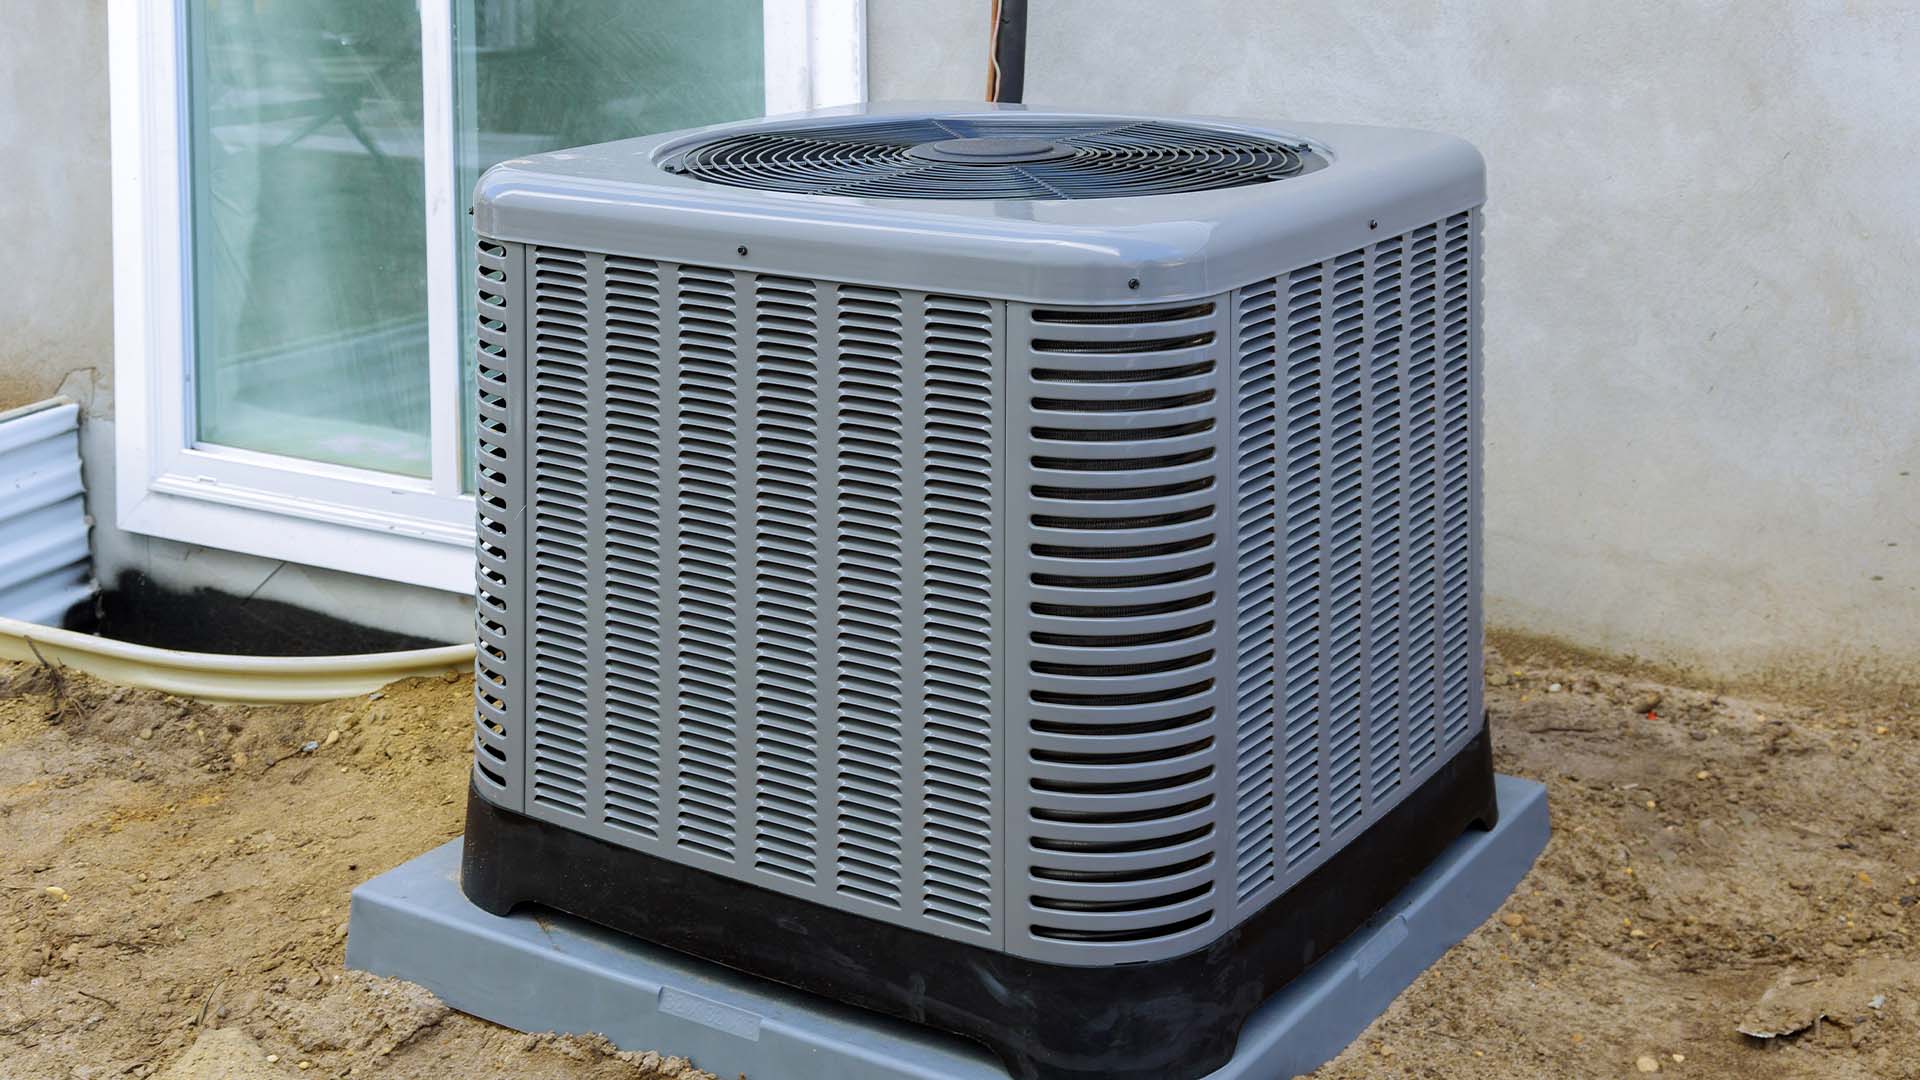 Air Conditioning Repair Services in DFW